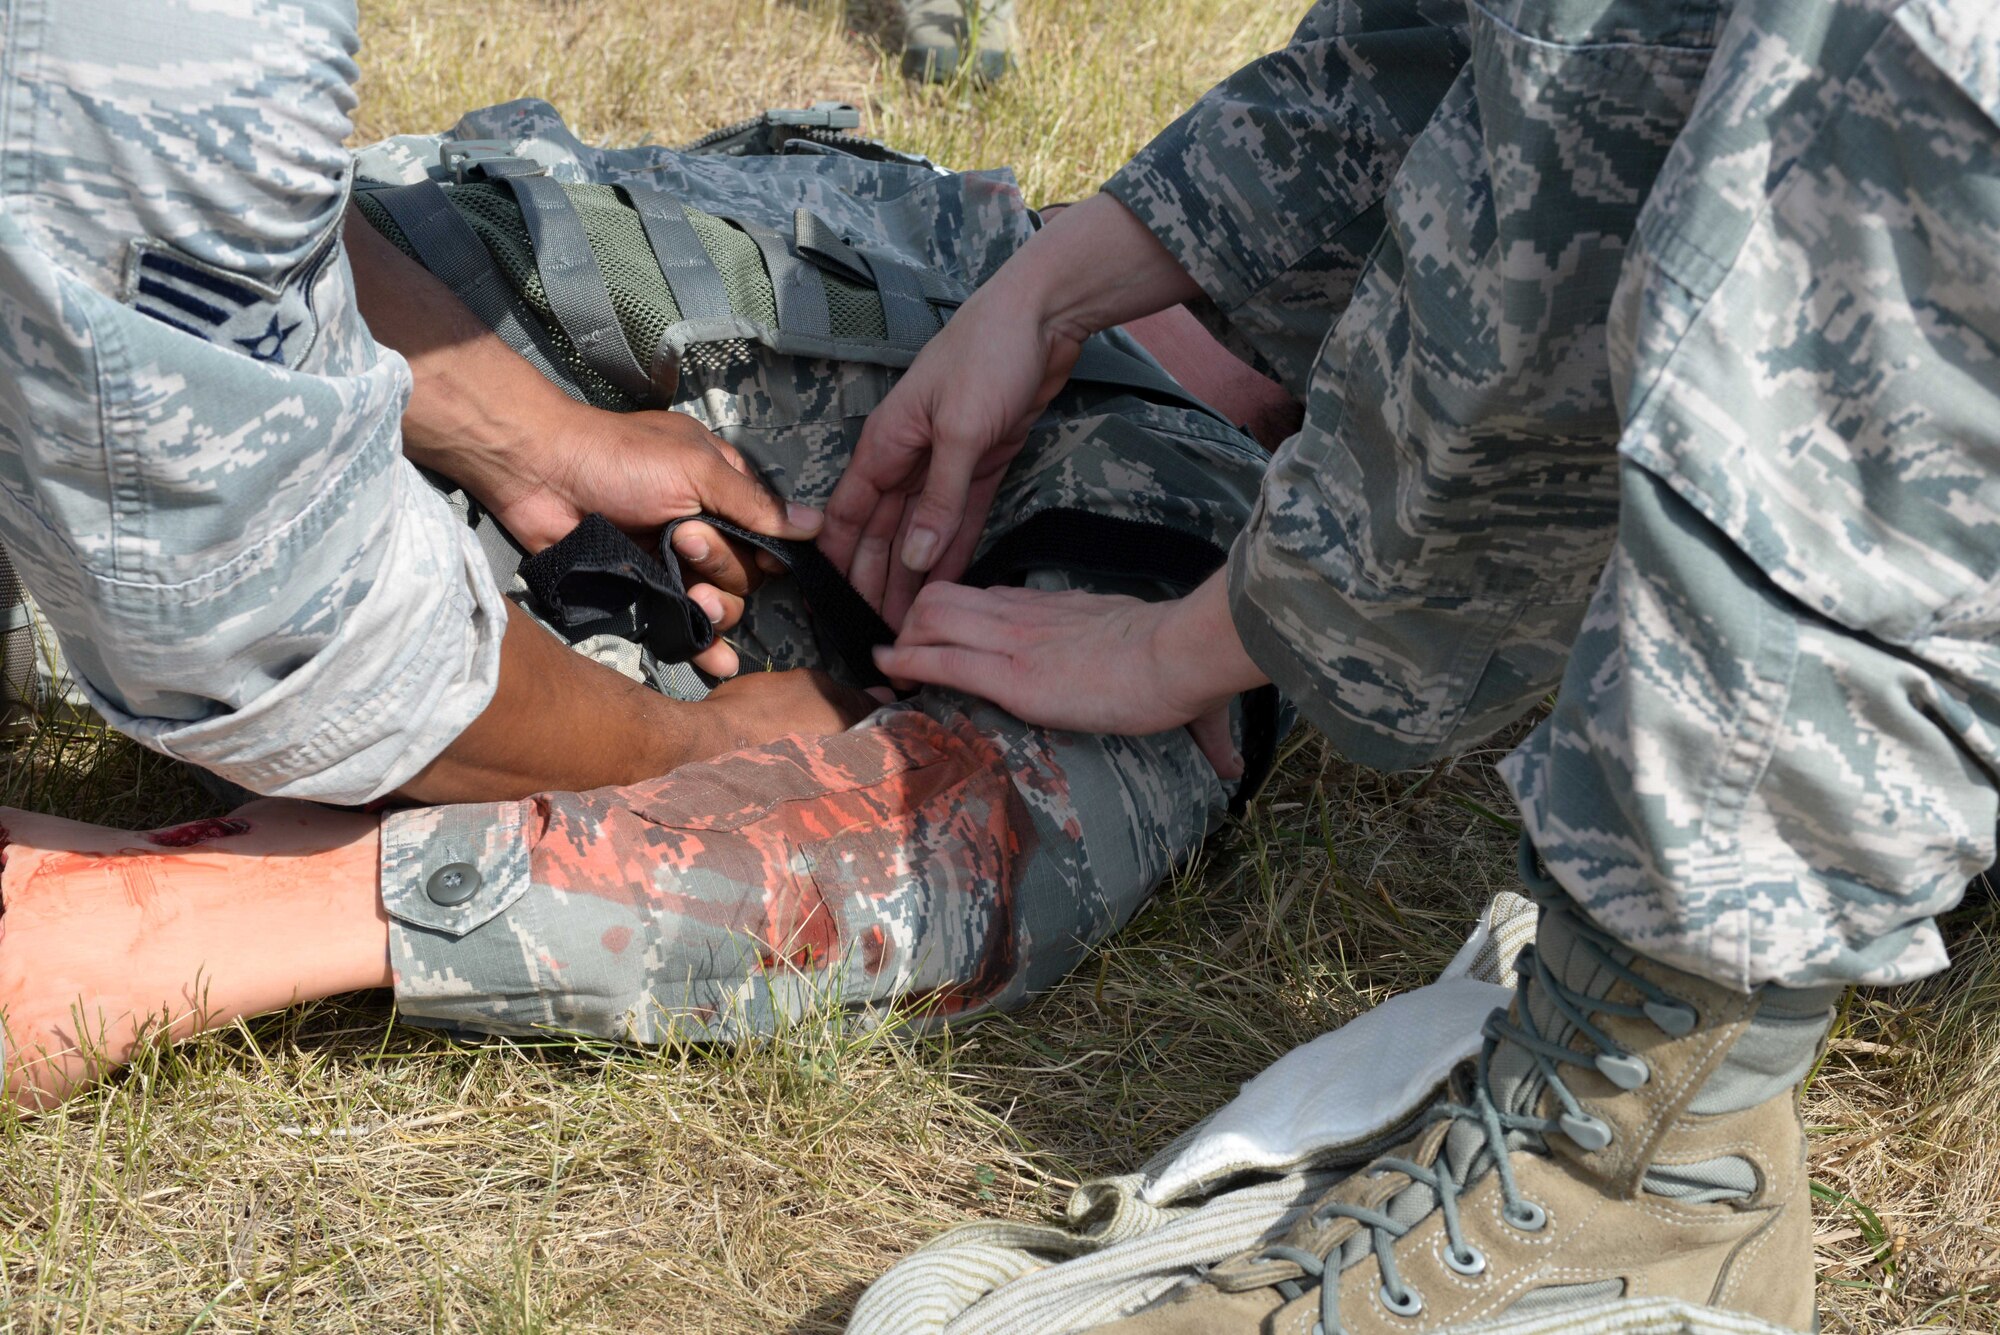 Airmen treat wounds on volunteer casualties at the Self Aid Buddy Care (SABC) station during the Prime Base Engineer Emergency Force (BEEF) challenge at Ellsworth Air Force Base, S.D., July 22, 2016. The Prime BEEF challenge consists of five events such as the Litter Carry, Six Passenger Push, SABC, M4 relay and Battle Buddy stations. (U.S. Air Force photo by Airman Donald Knechtel) 